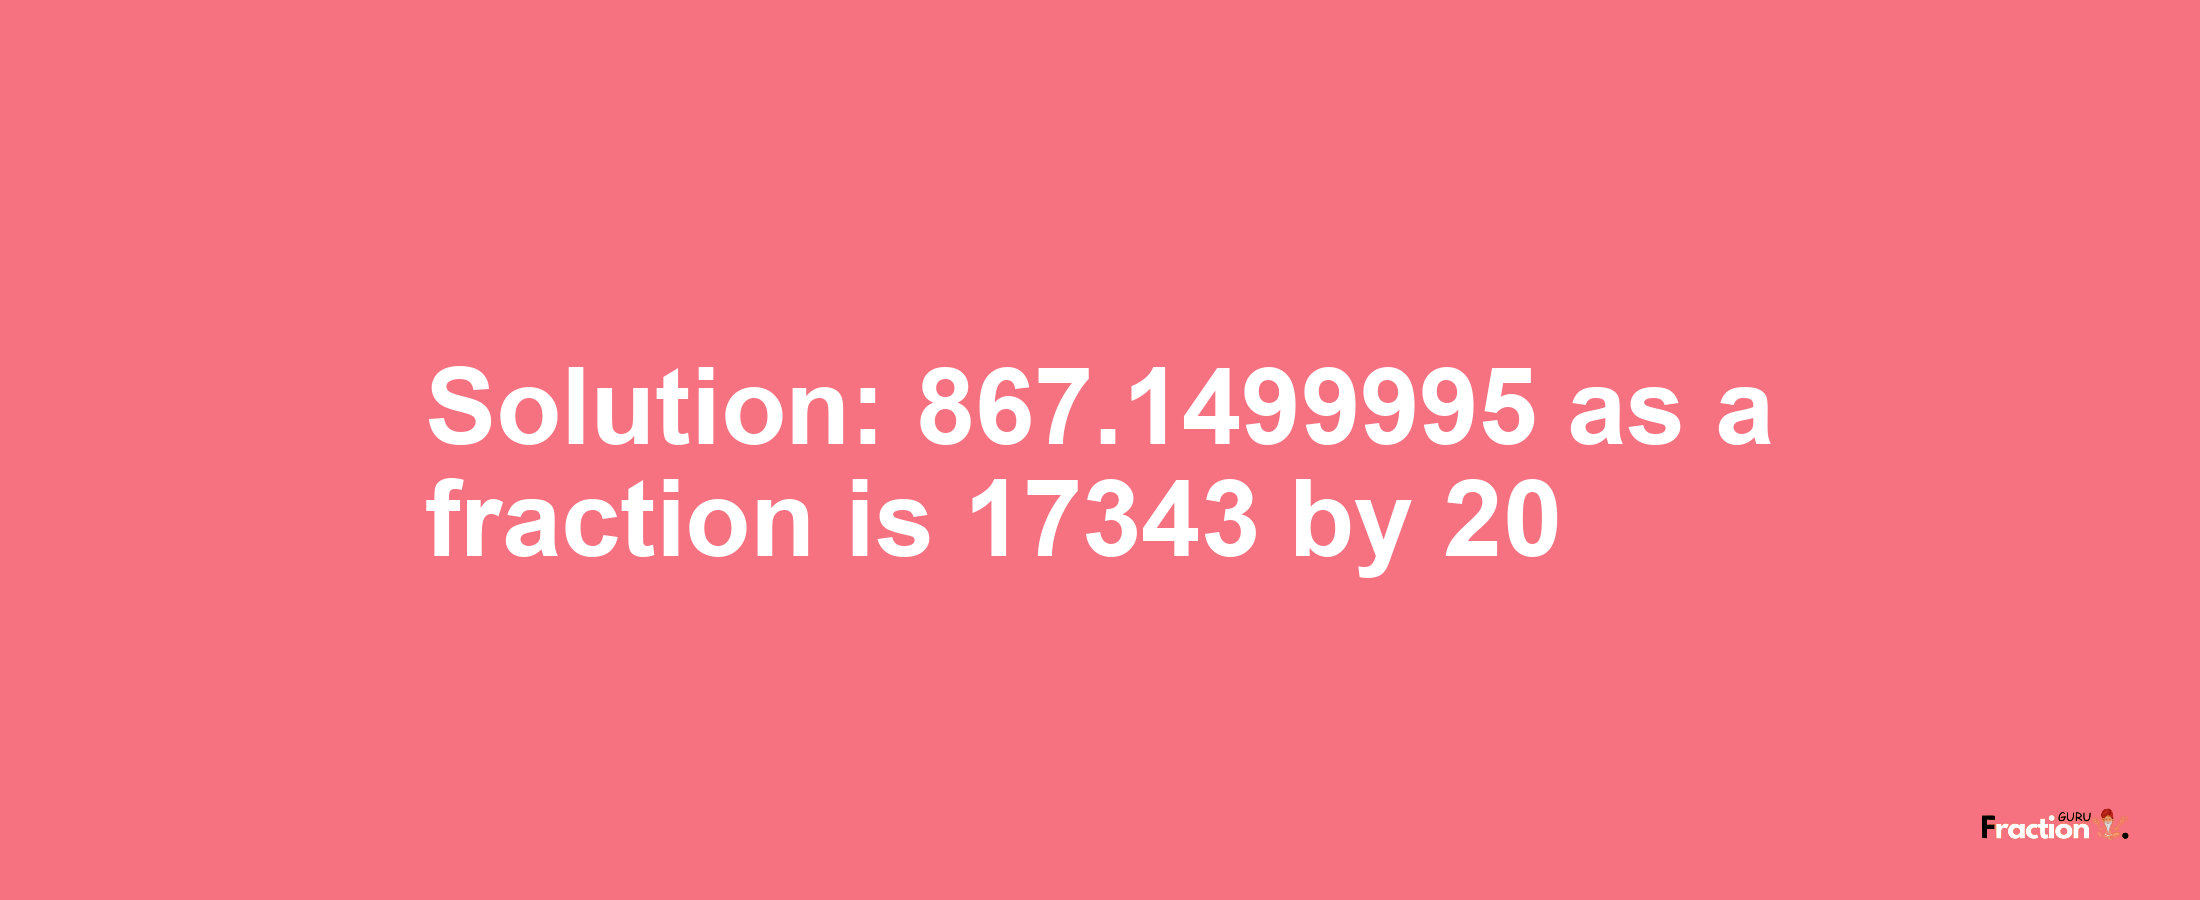 Solution:867.1499995 as a fraction is 17343/20